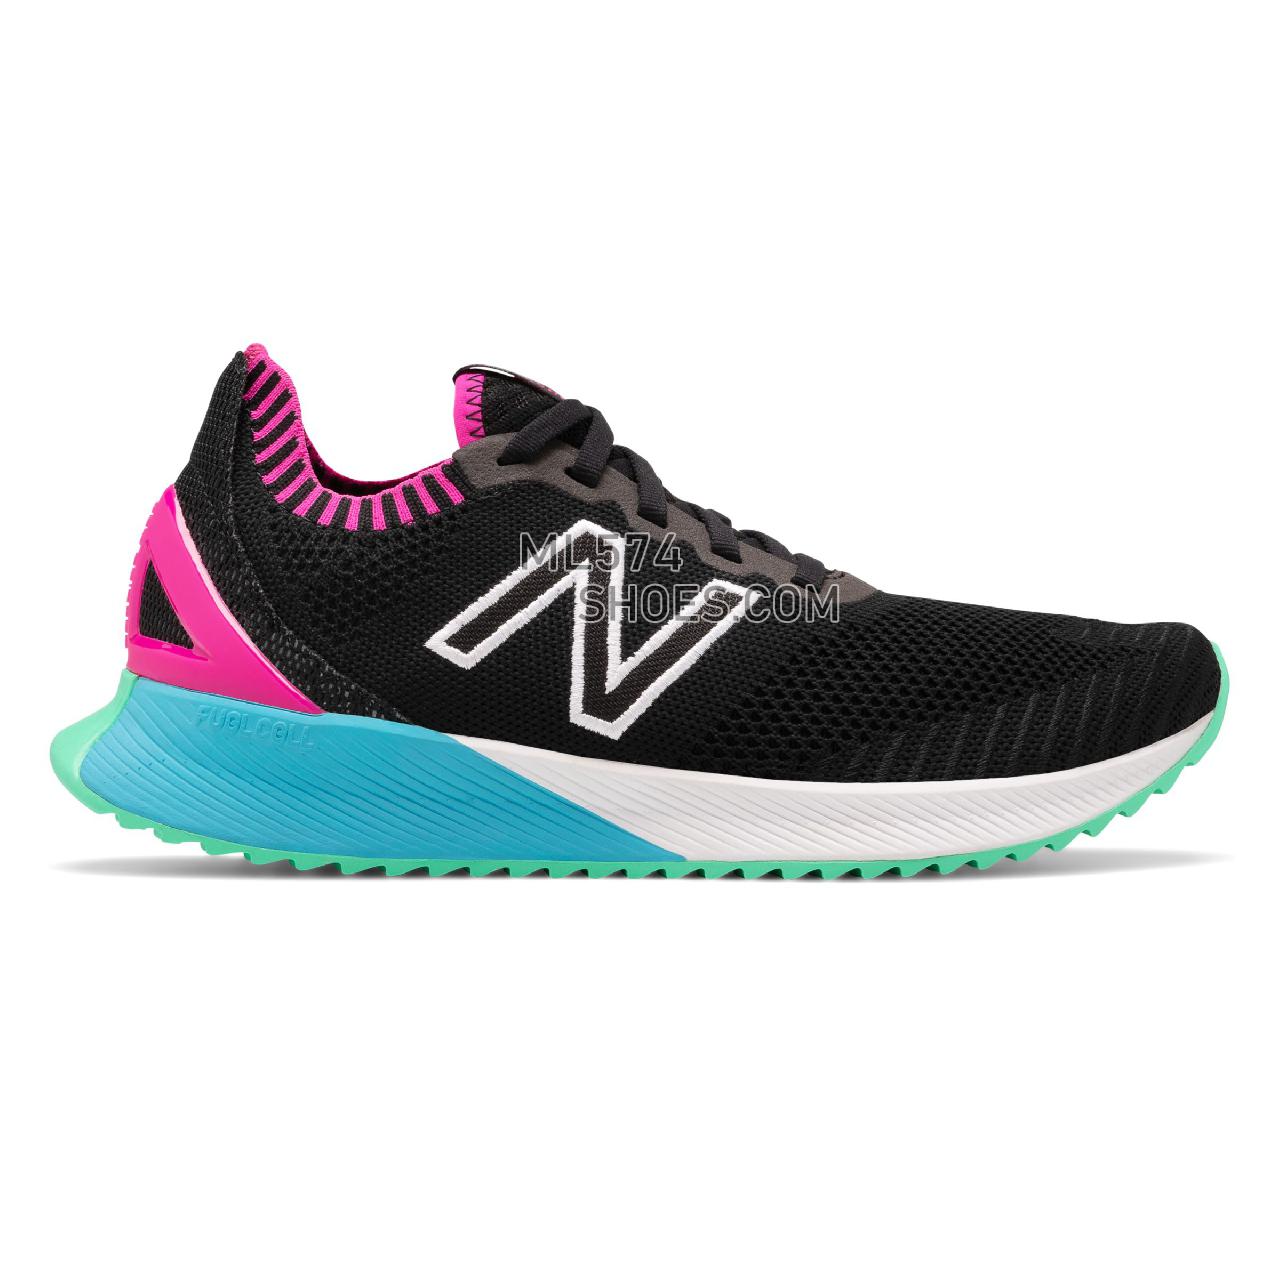 New Balance FuelCell Echo - Women's Neutral Running - Black with Peony and Bayside - WFCECSB